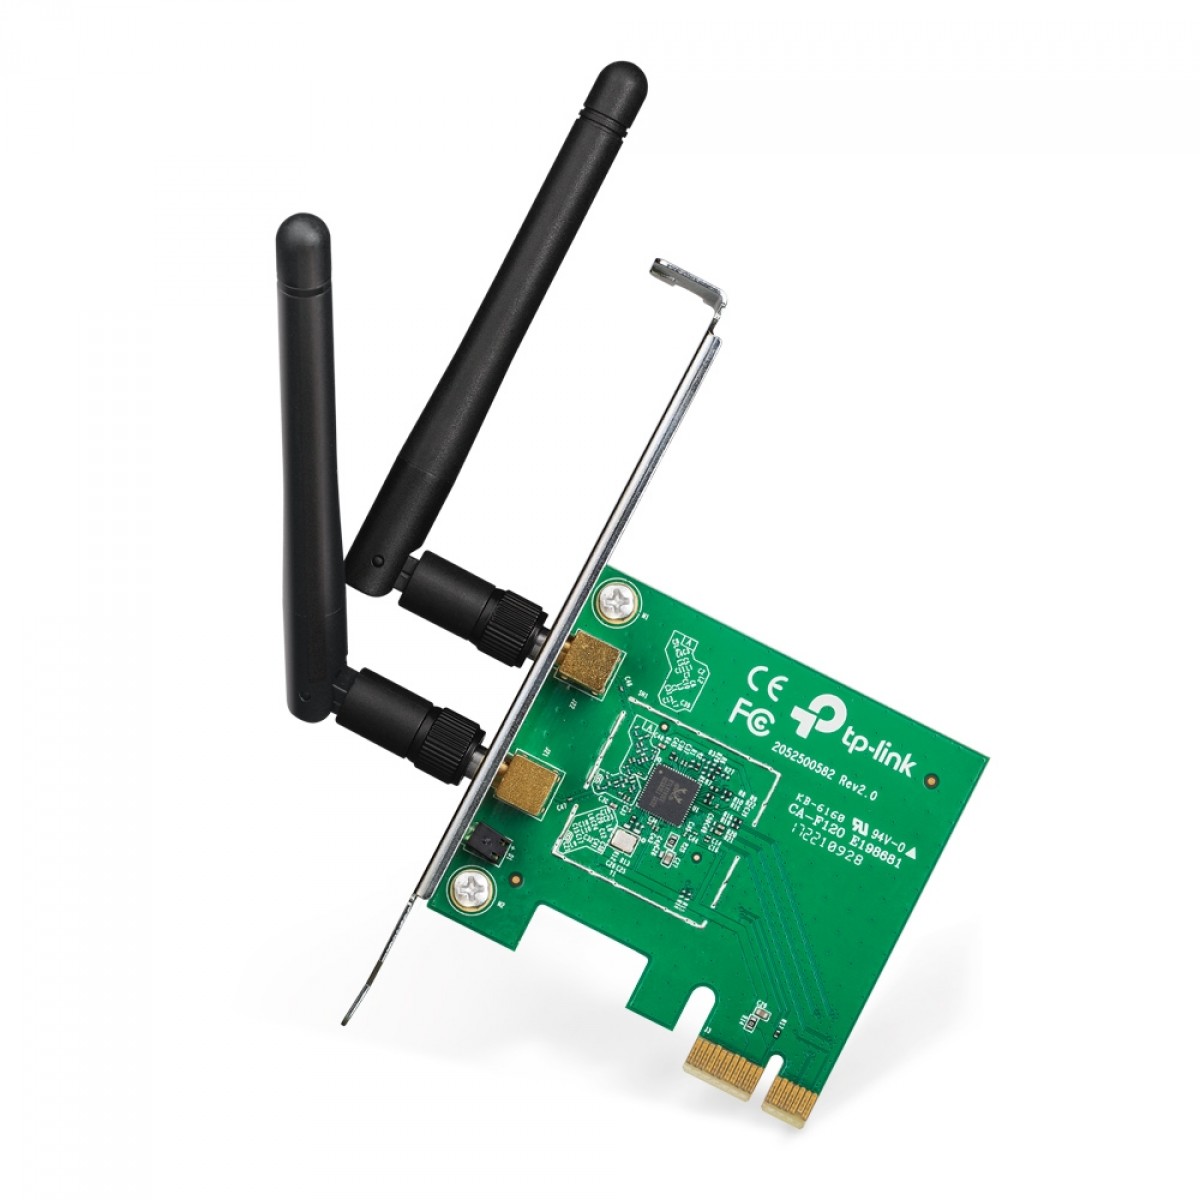 Adaptador Wireless N PCI Express TP-Link, 300Mbps, TL-WN881ND